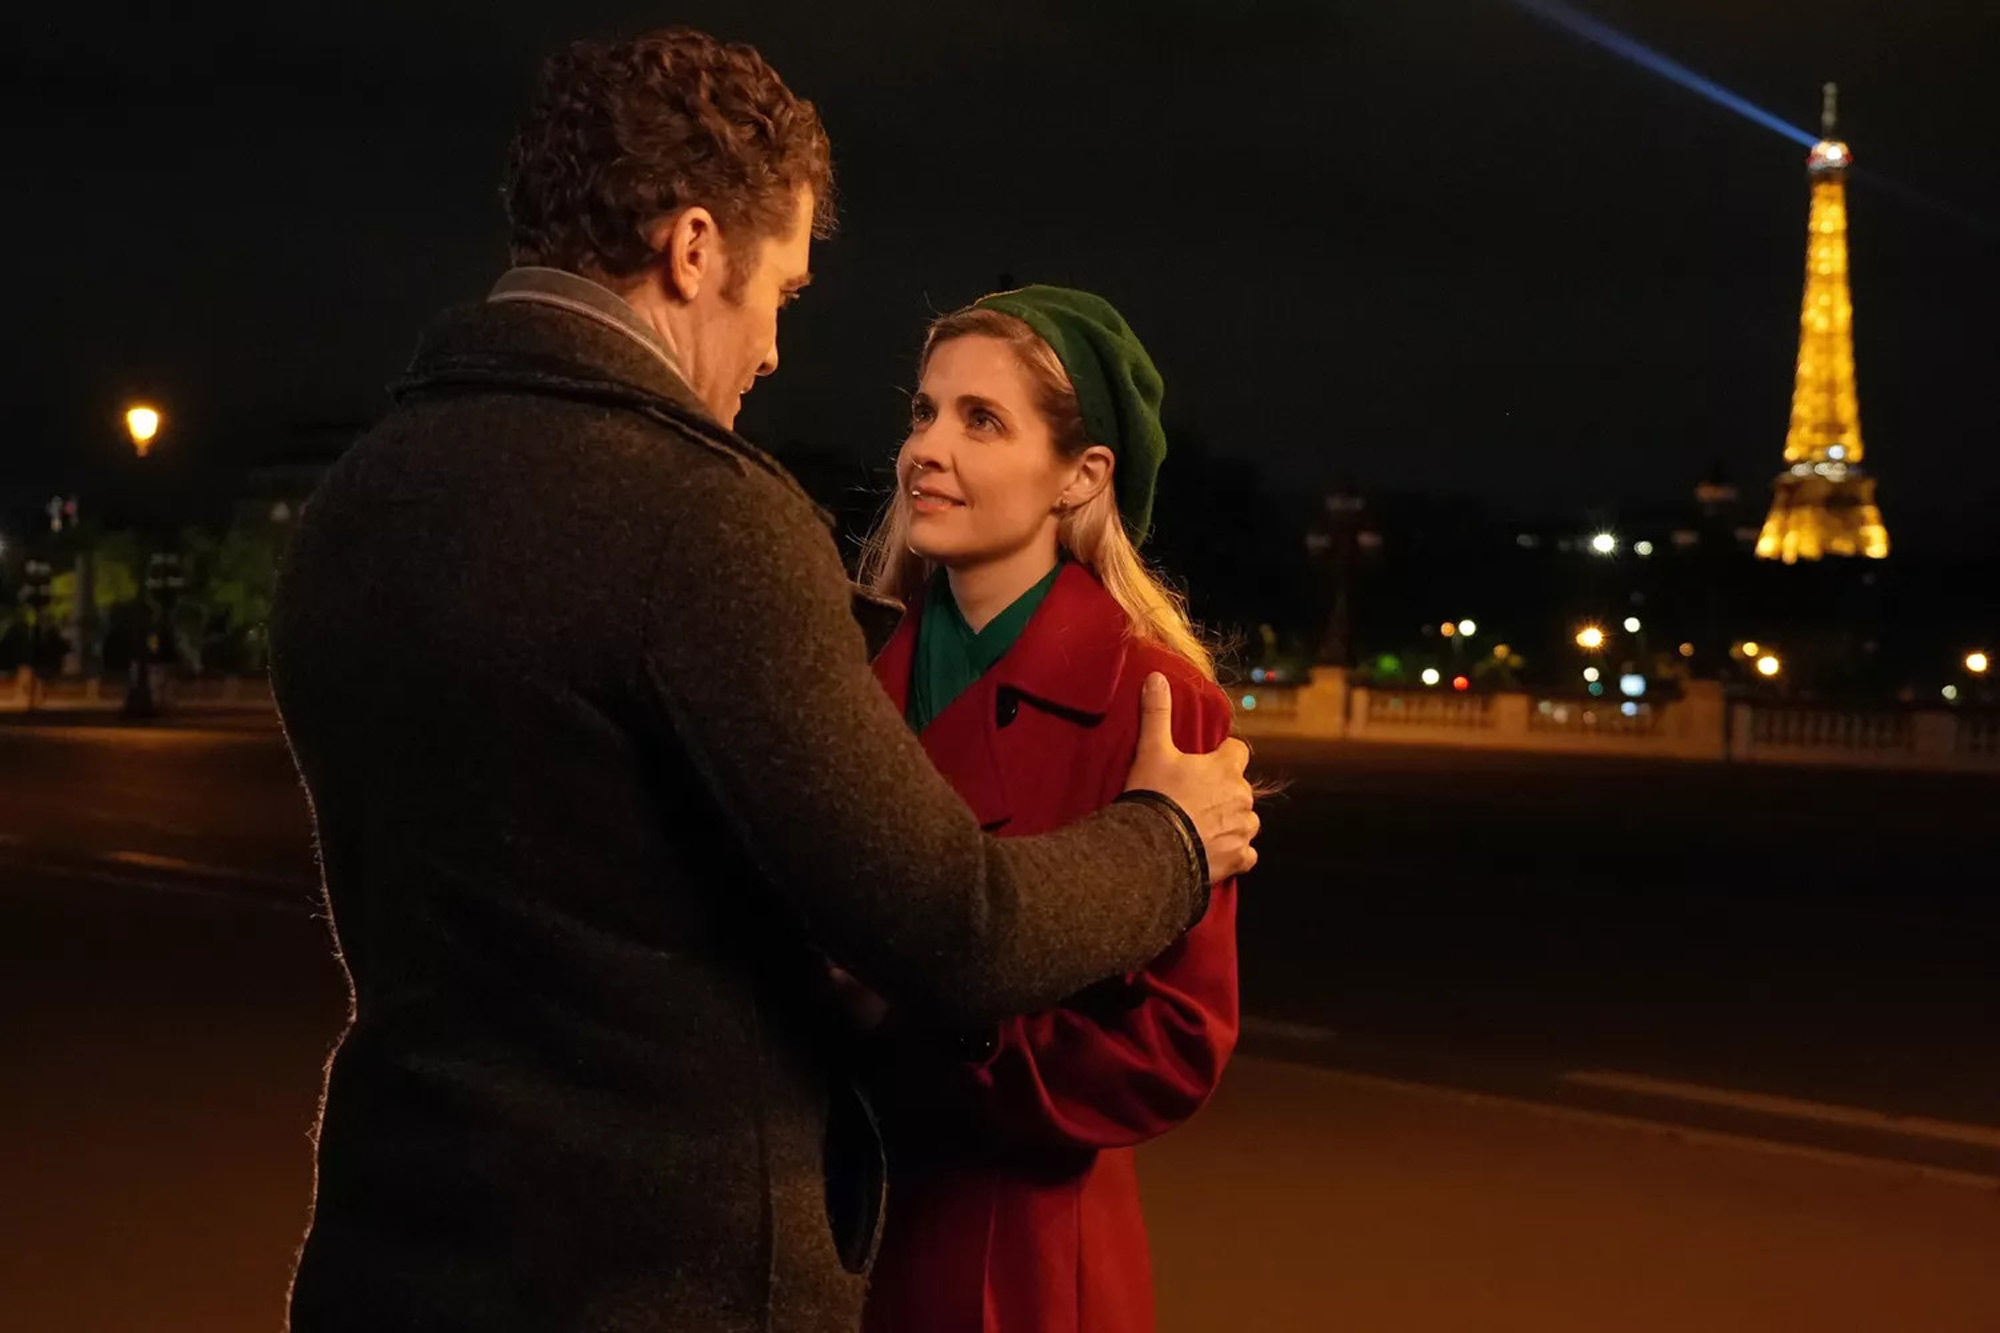 Movie frame featureing Jen Lilley standing with a leading man in Paris at night with the Eiffel Tower behind her